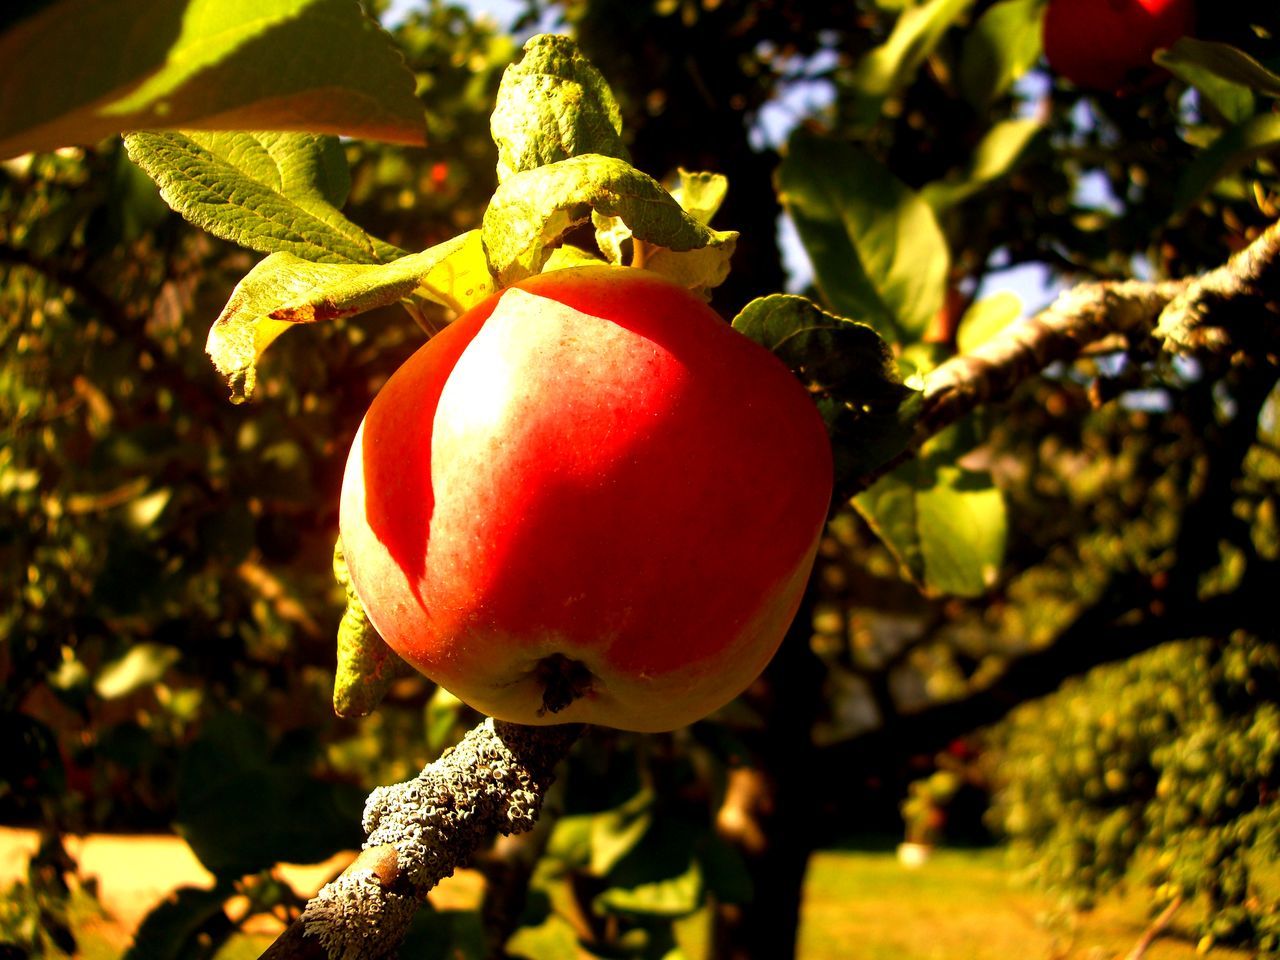 fruit, healthy eating, food, tree, food and drink, plant, flower, branch, autumn, nature, freshness, growth, produce, wellbeing, leaf, yellow, no people, agriculture, fruit tree, sunlight, close-up, macro photography, focus on foreground, plant part, ripe, outdoors, day, red, blossom, hanging, pomegranate, organic, green